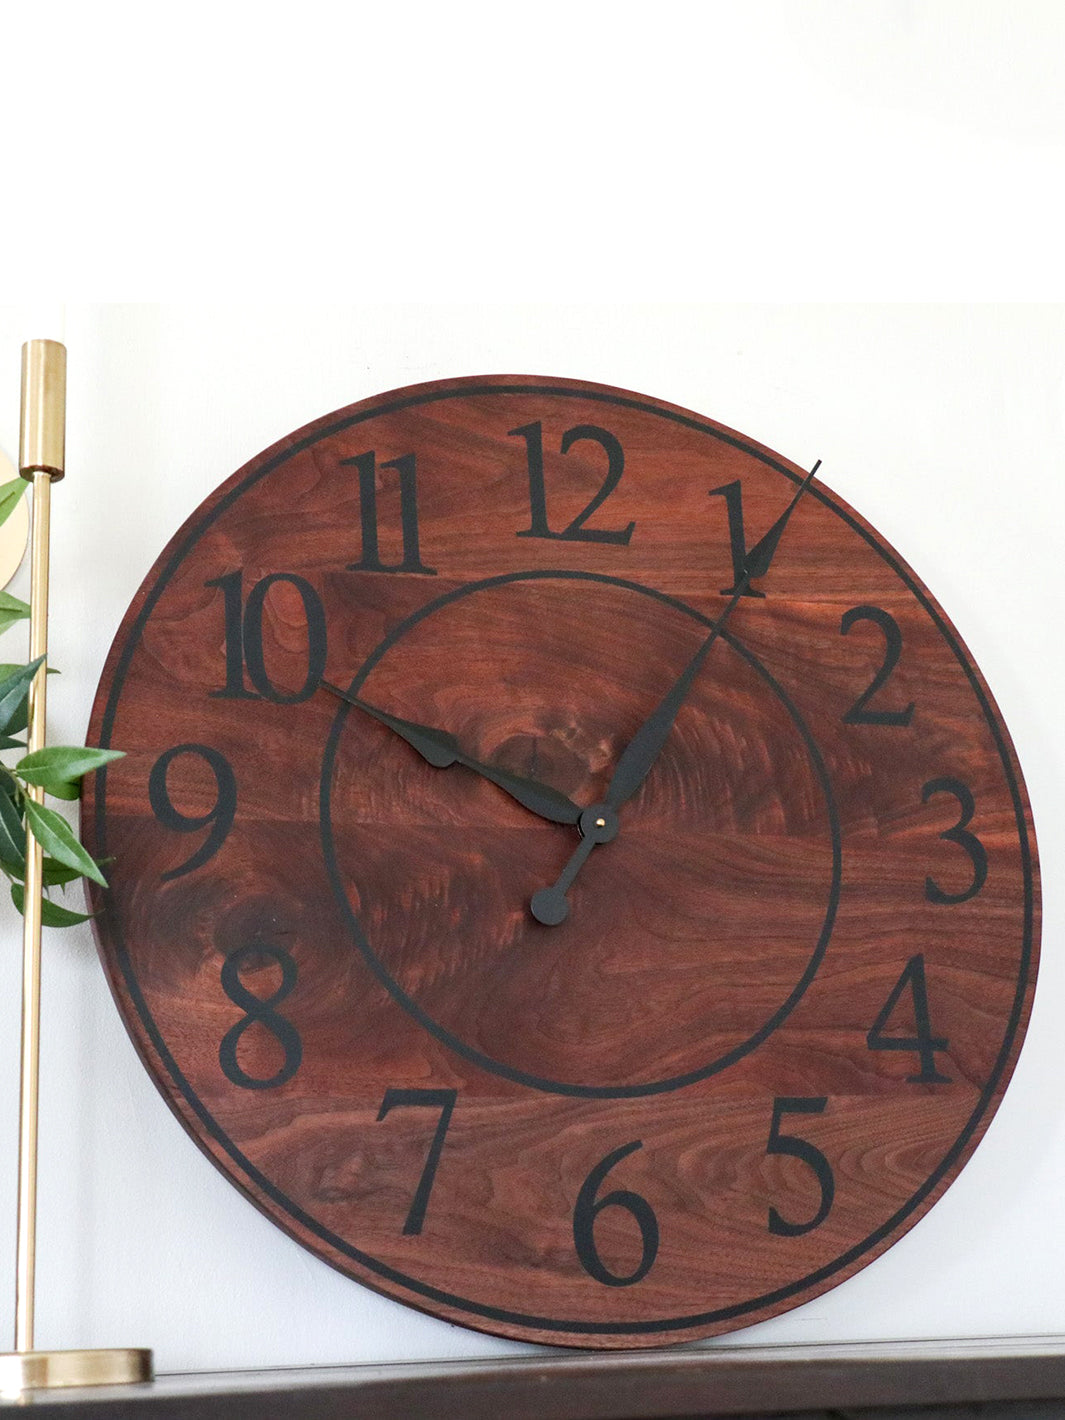 Solid Walnut Wood Wall Clock with Black Numbers Earthly Comfort Clock 1389-5